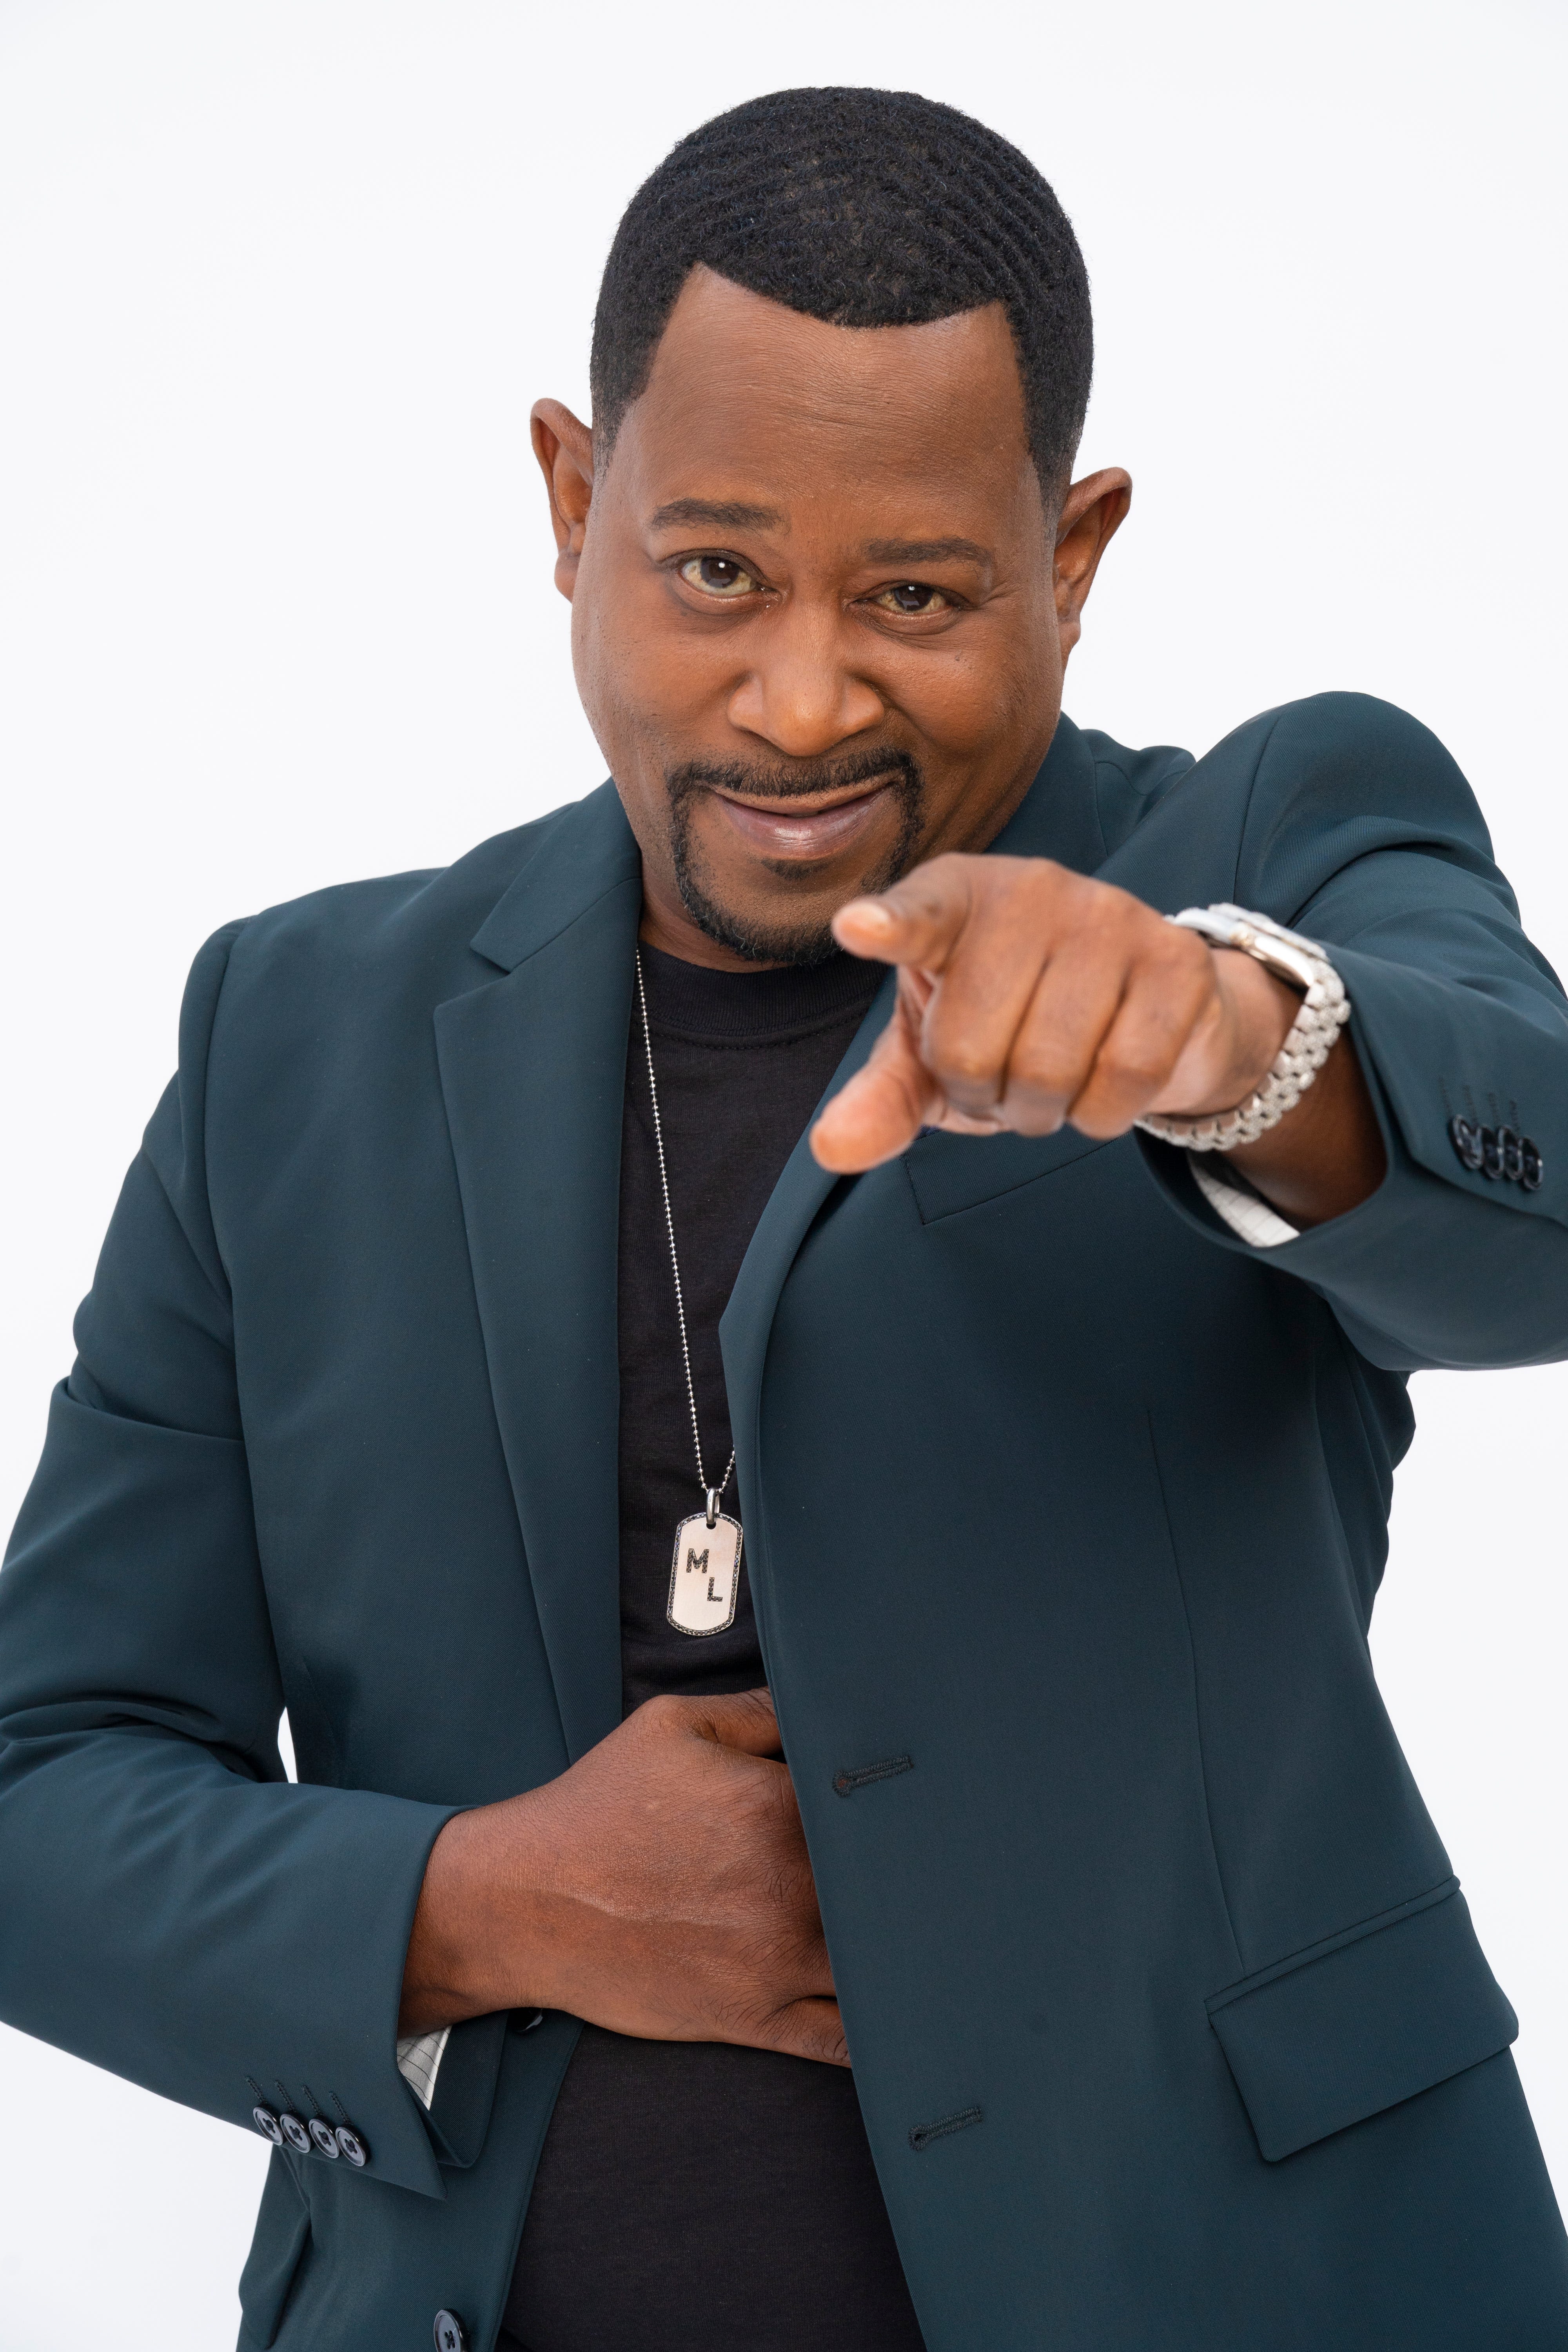 Martin Lawrence bringing first comedy tour in 8 years to OKC: Here's when to get tickets